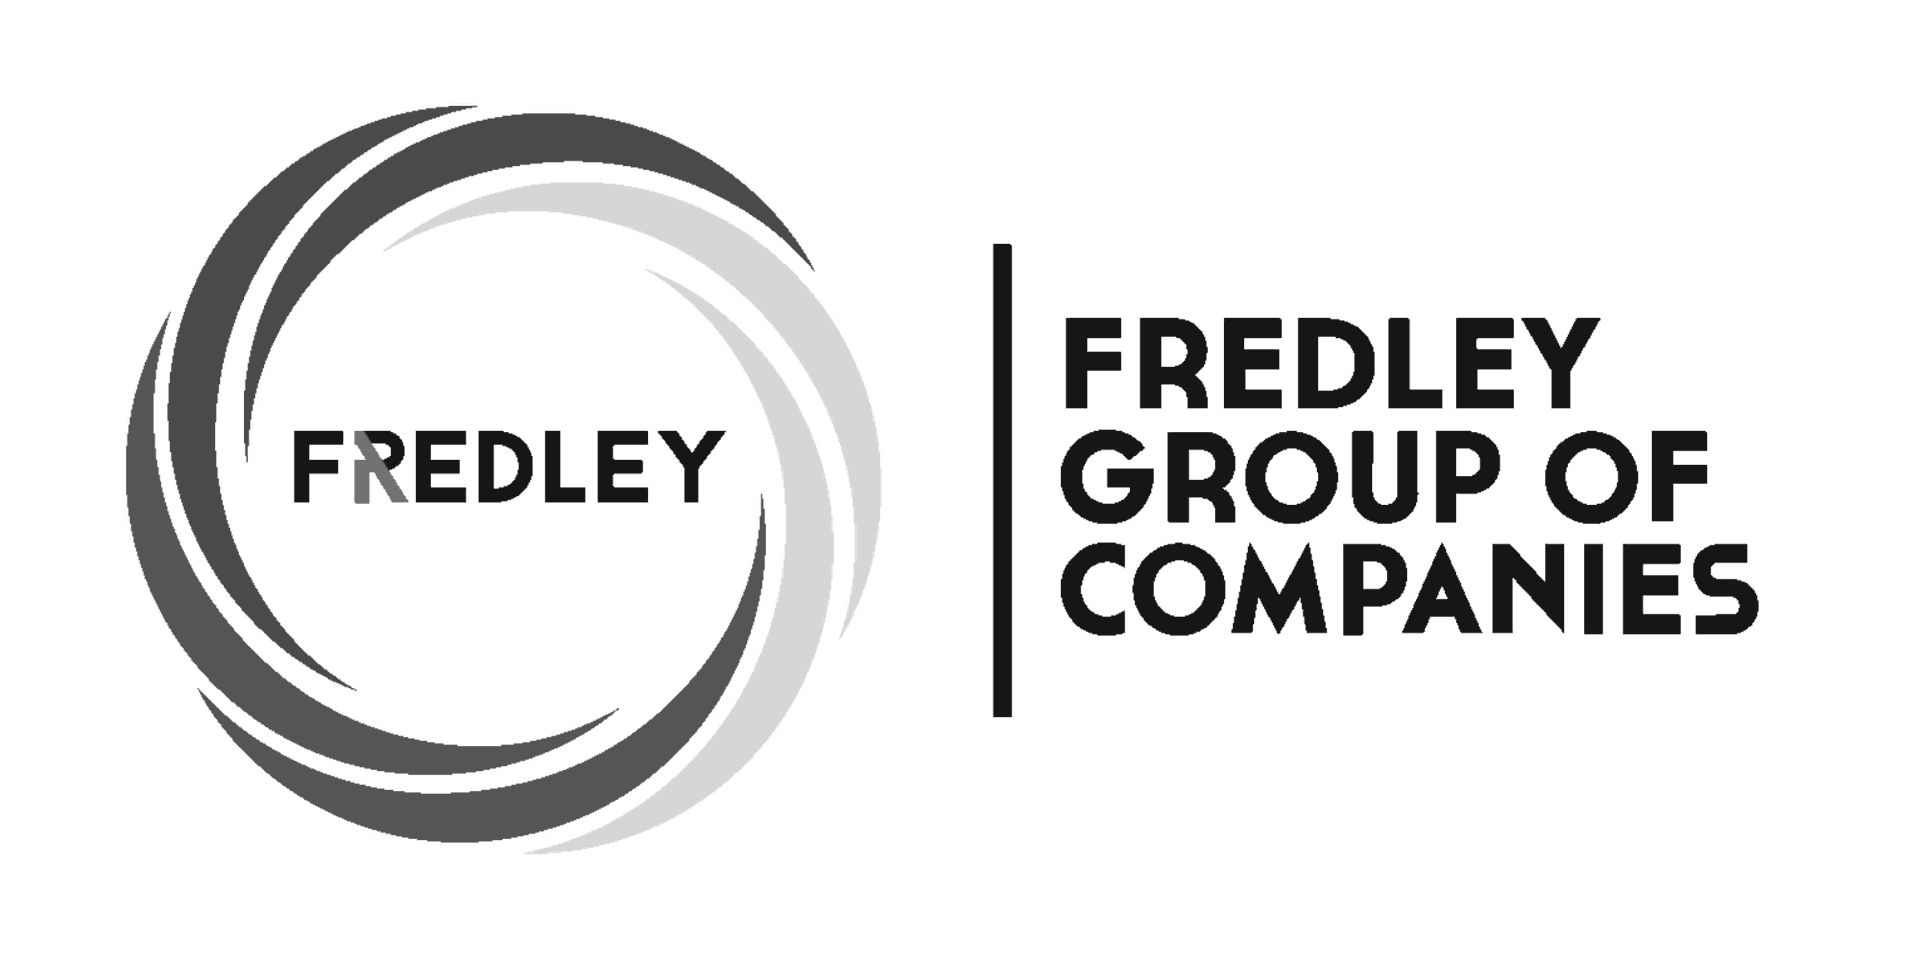 Fredley Group of Companies